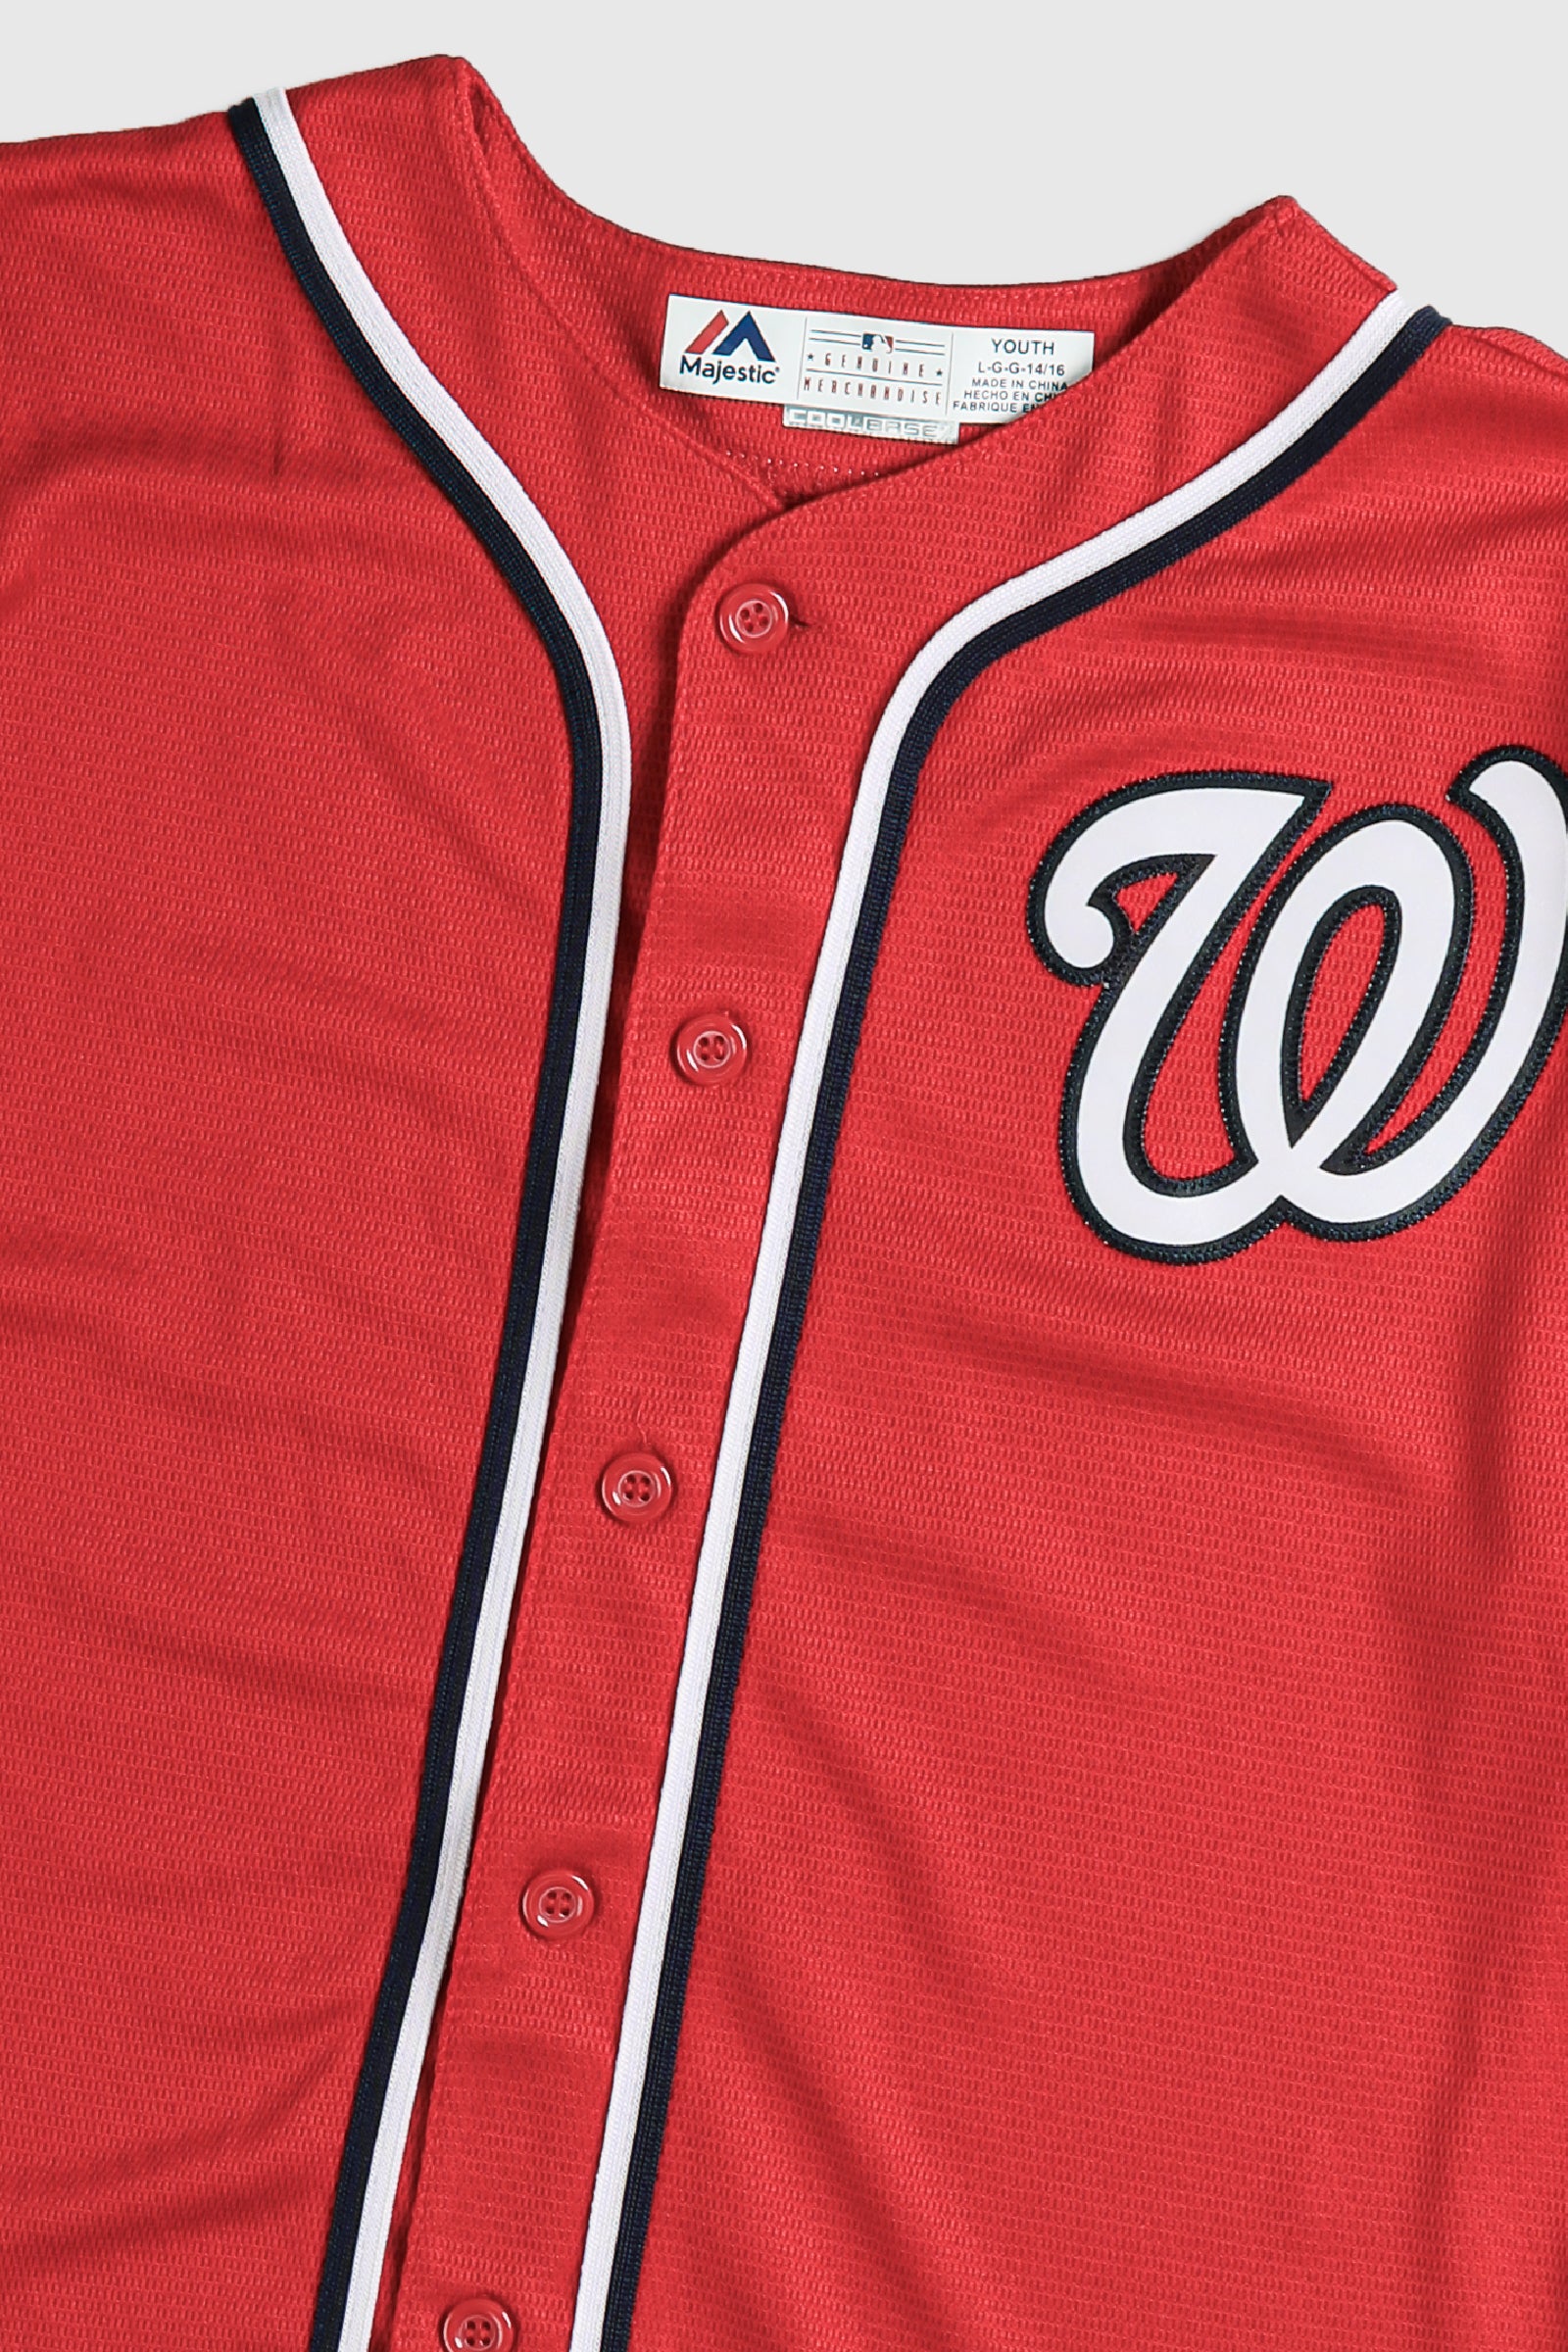 old nationals jersey